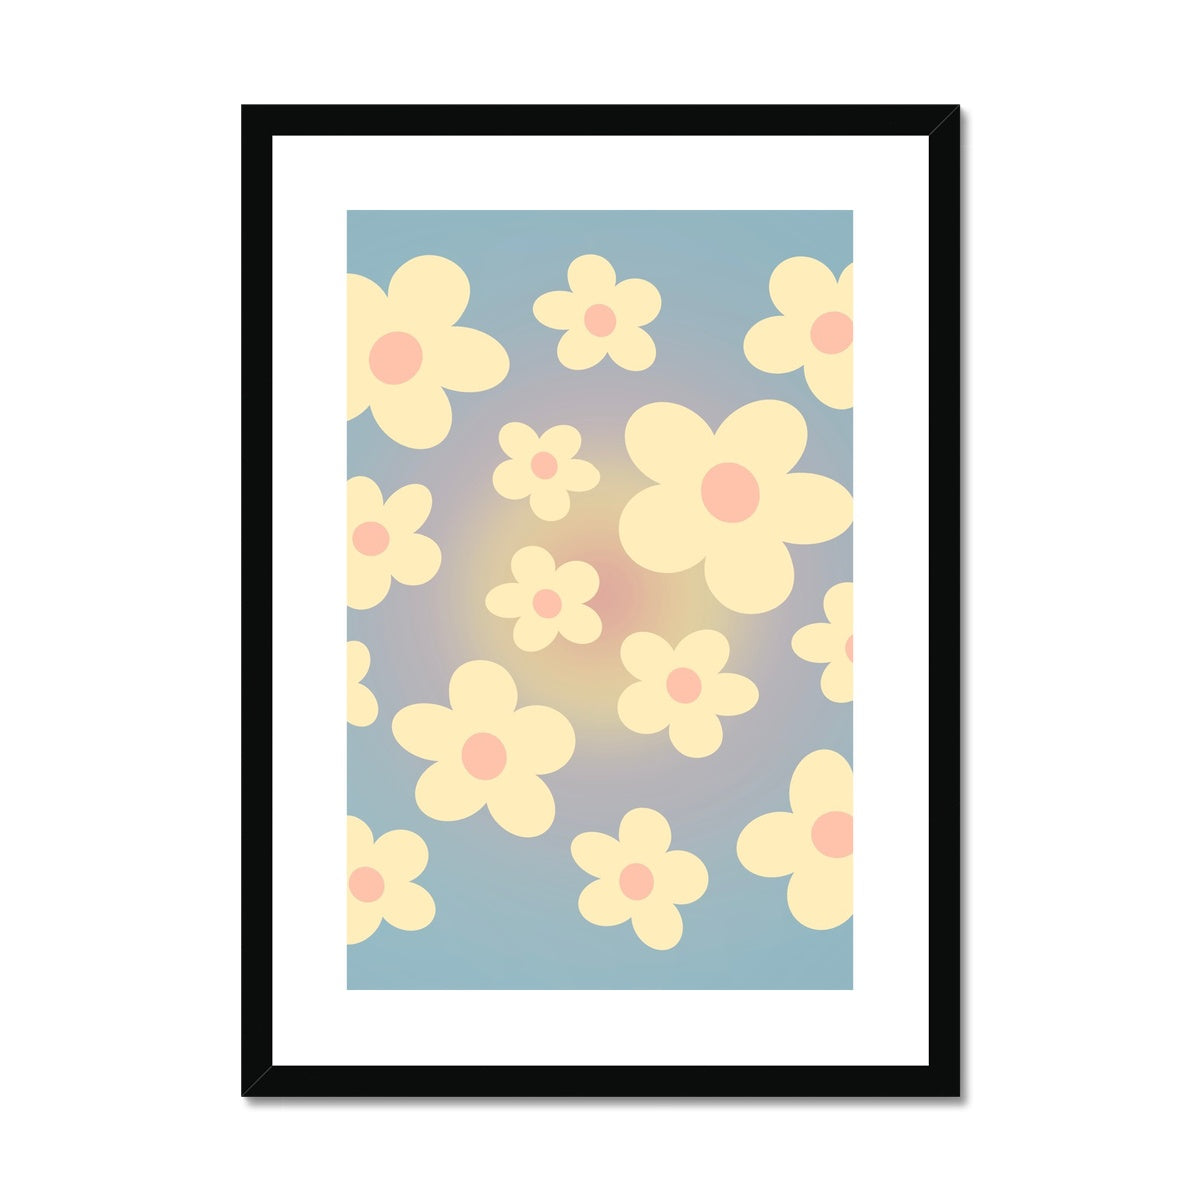 Danish pastel art prints full of daisy flowers and sunset gradient auras. Wall art with a flower market aesthetic. Trendy retro flower posters that are an aesthetic must have for dorm or apartment wall decor.